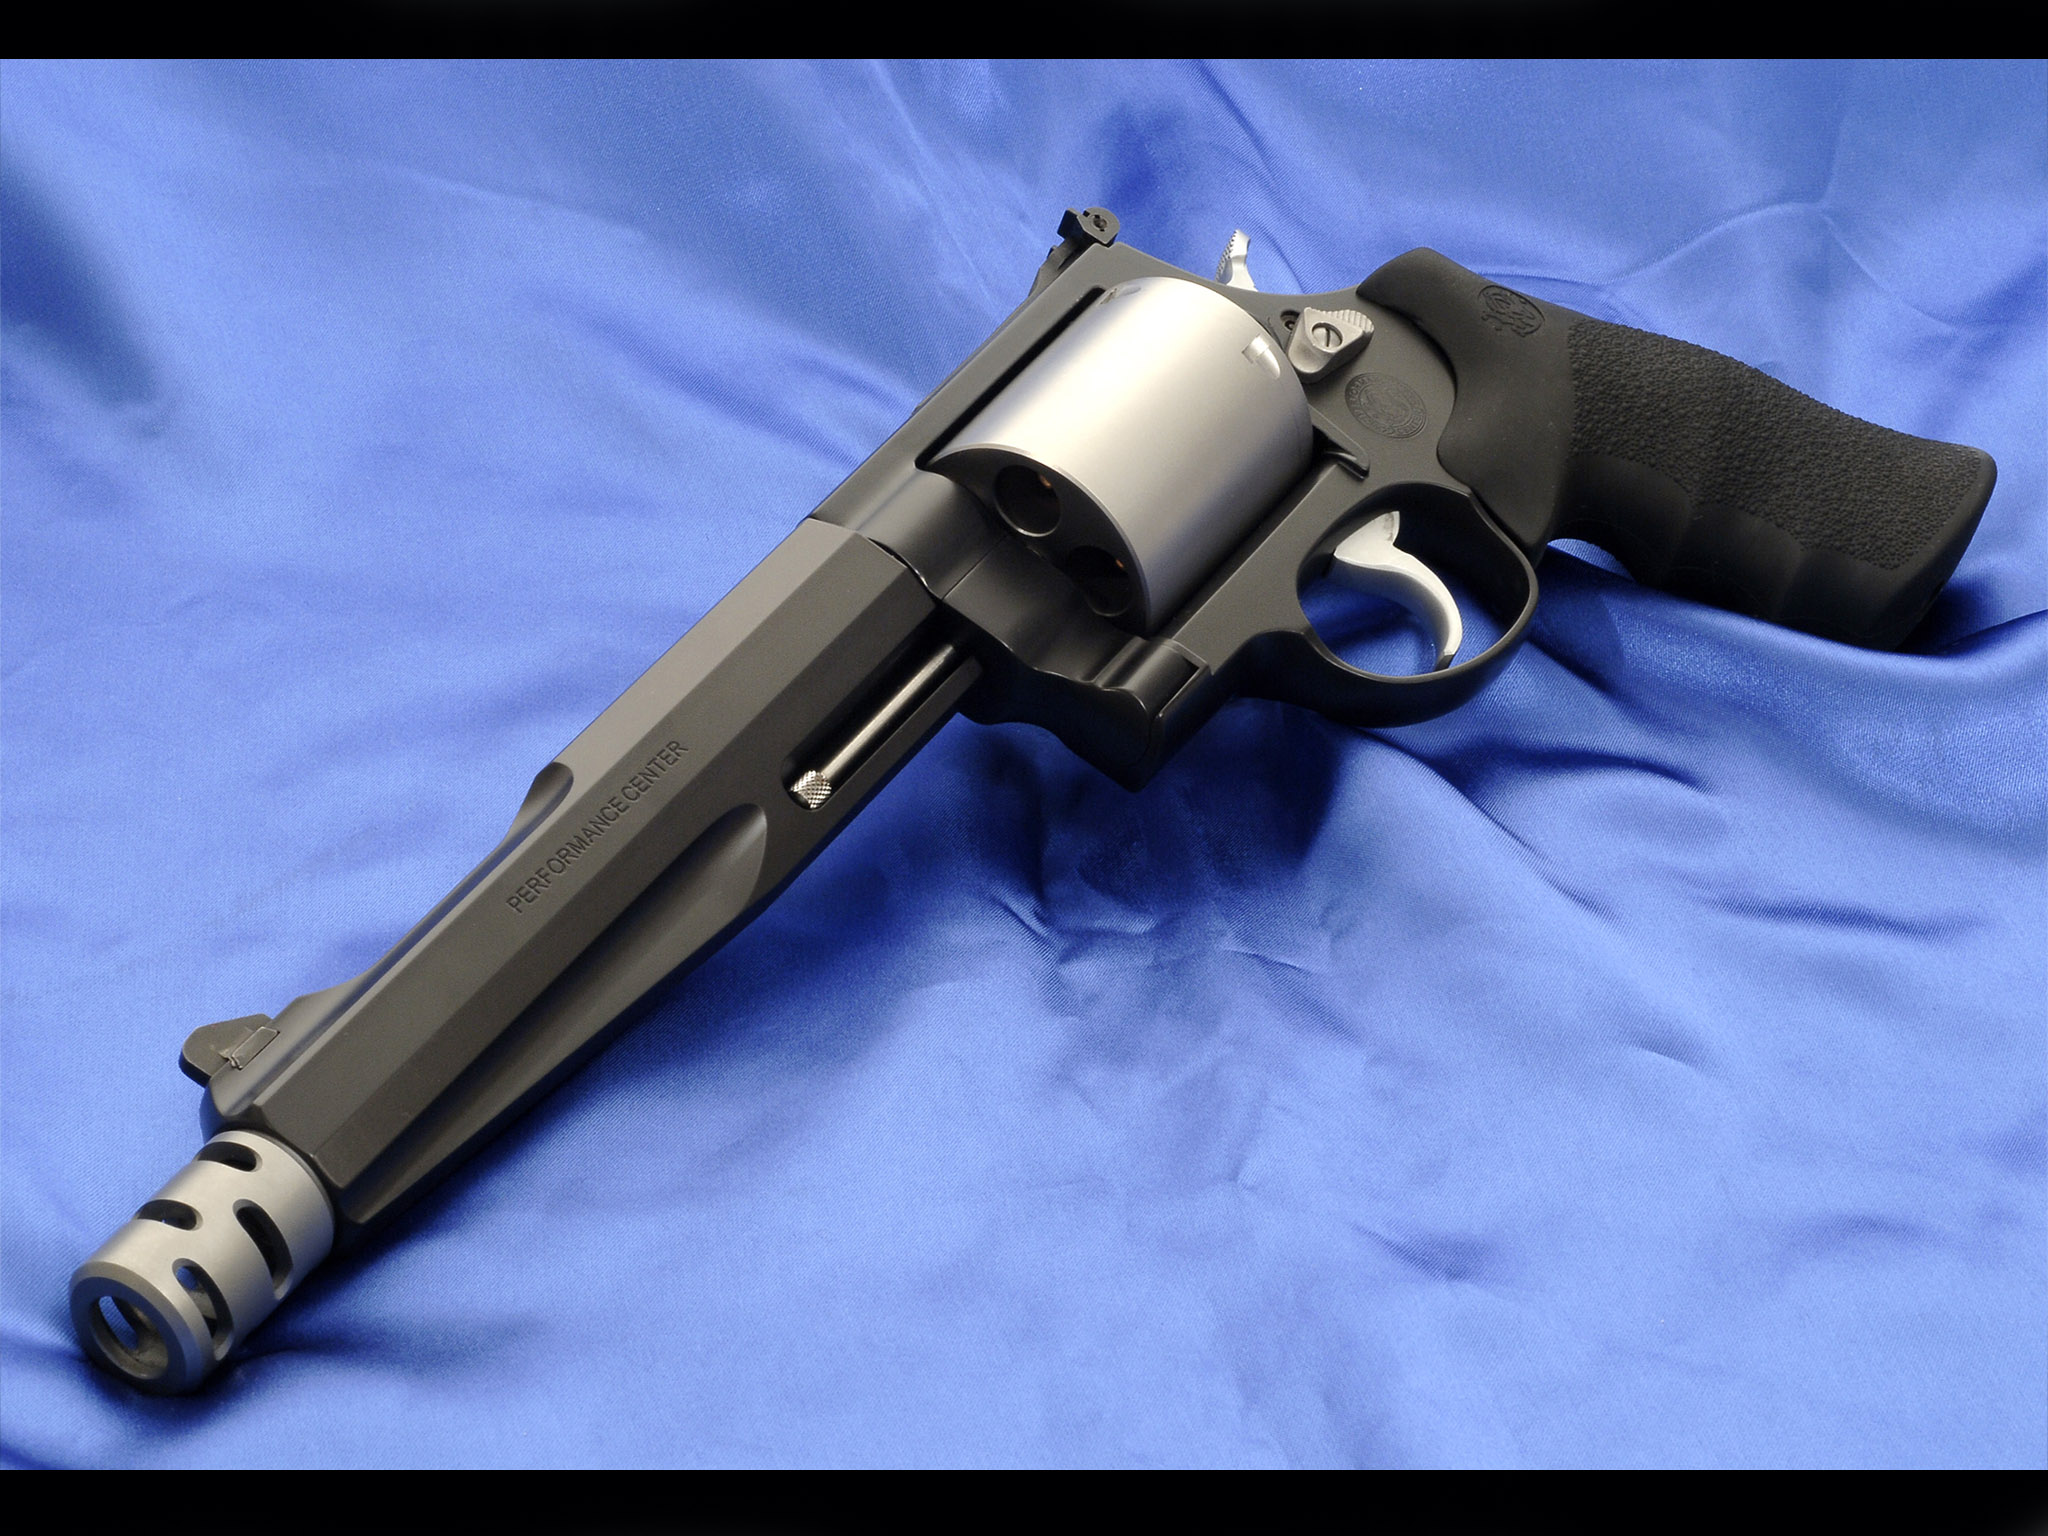 weapons, smith & wesson revolver